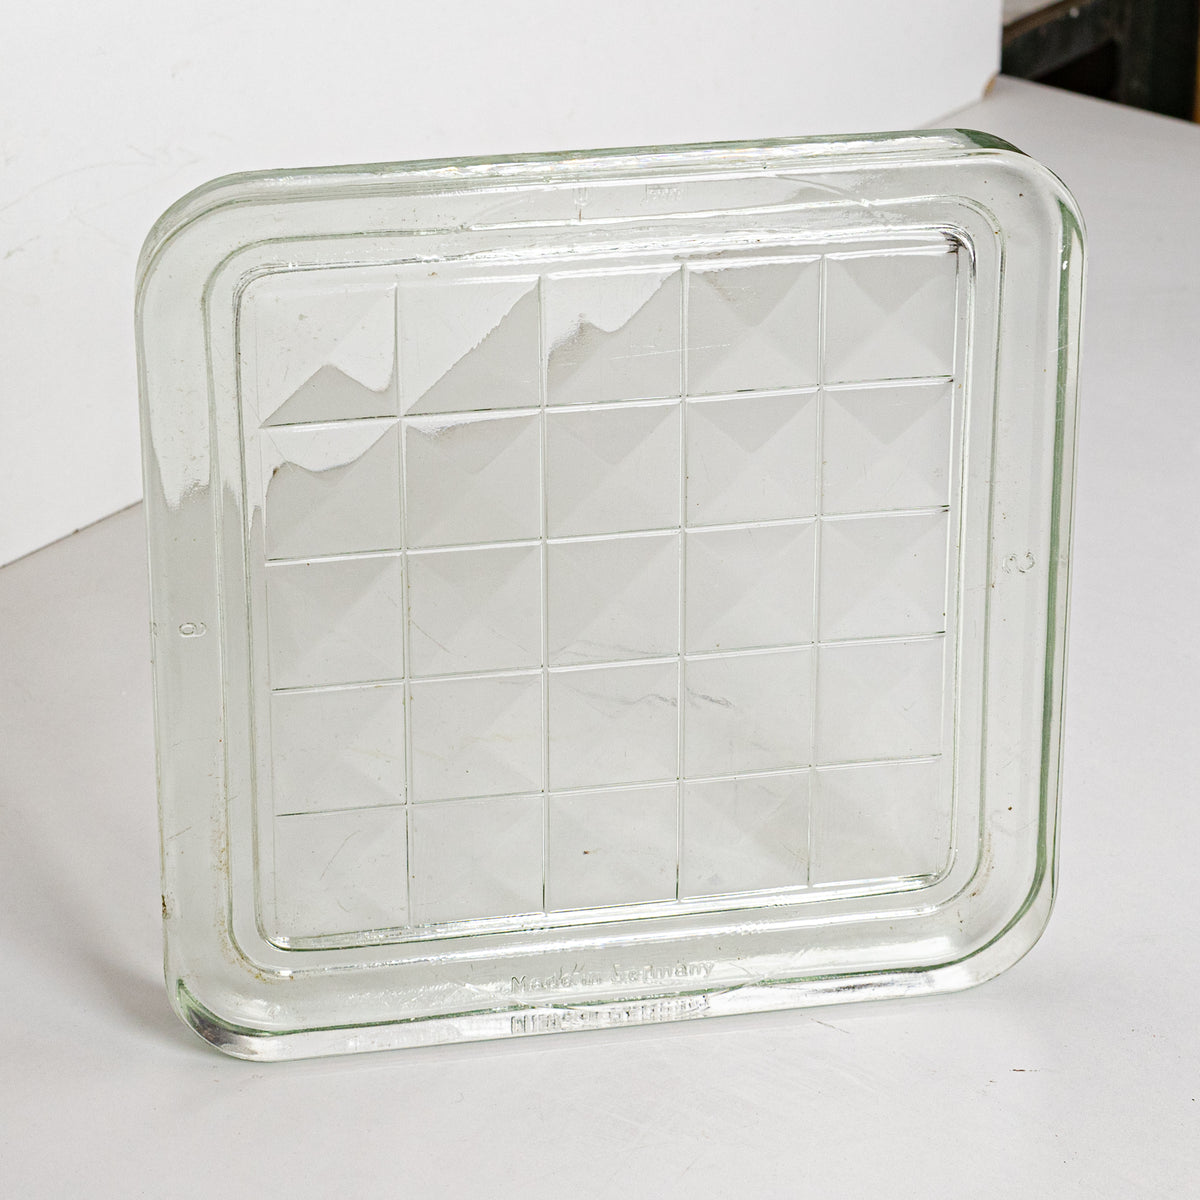 Reclaimed Glass Tiles | Square Prism Blocks | The Architectural Forum